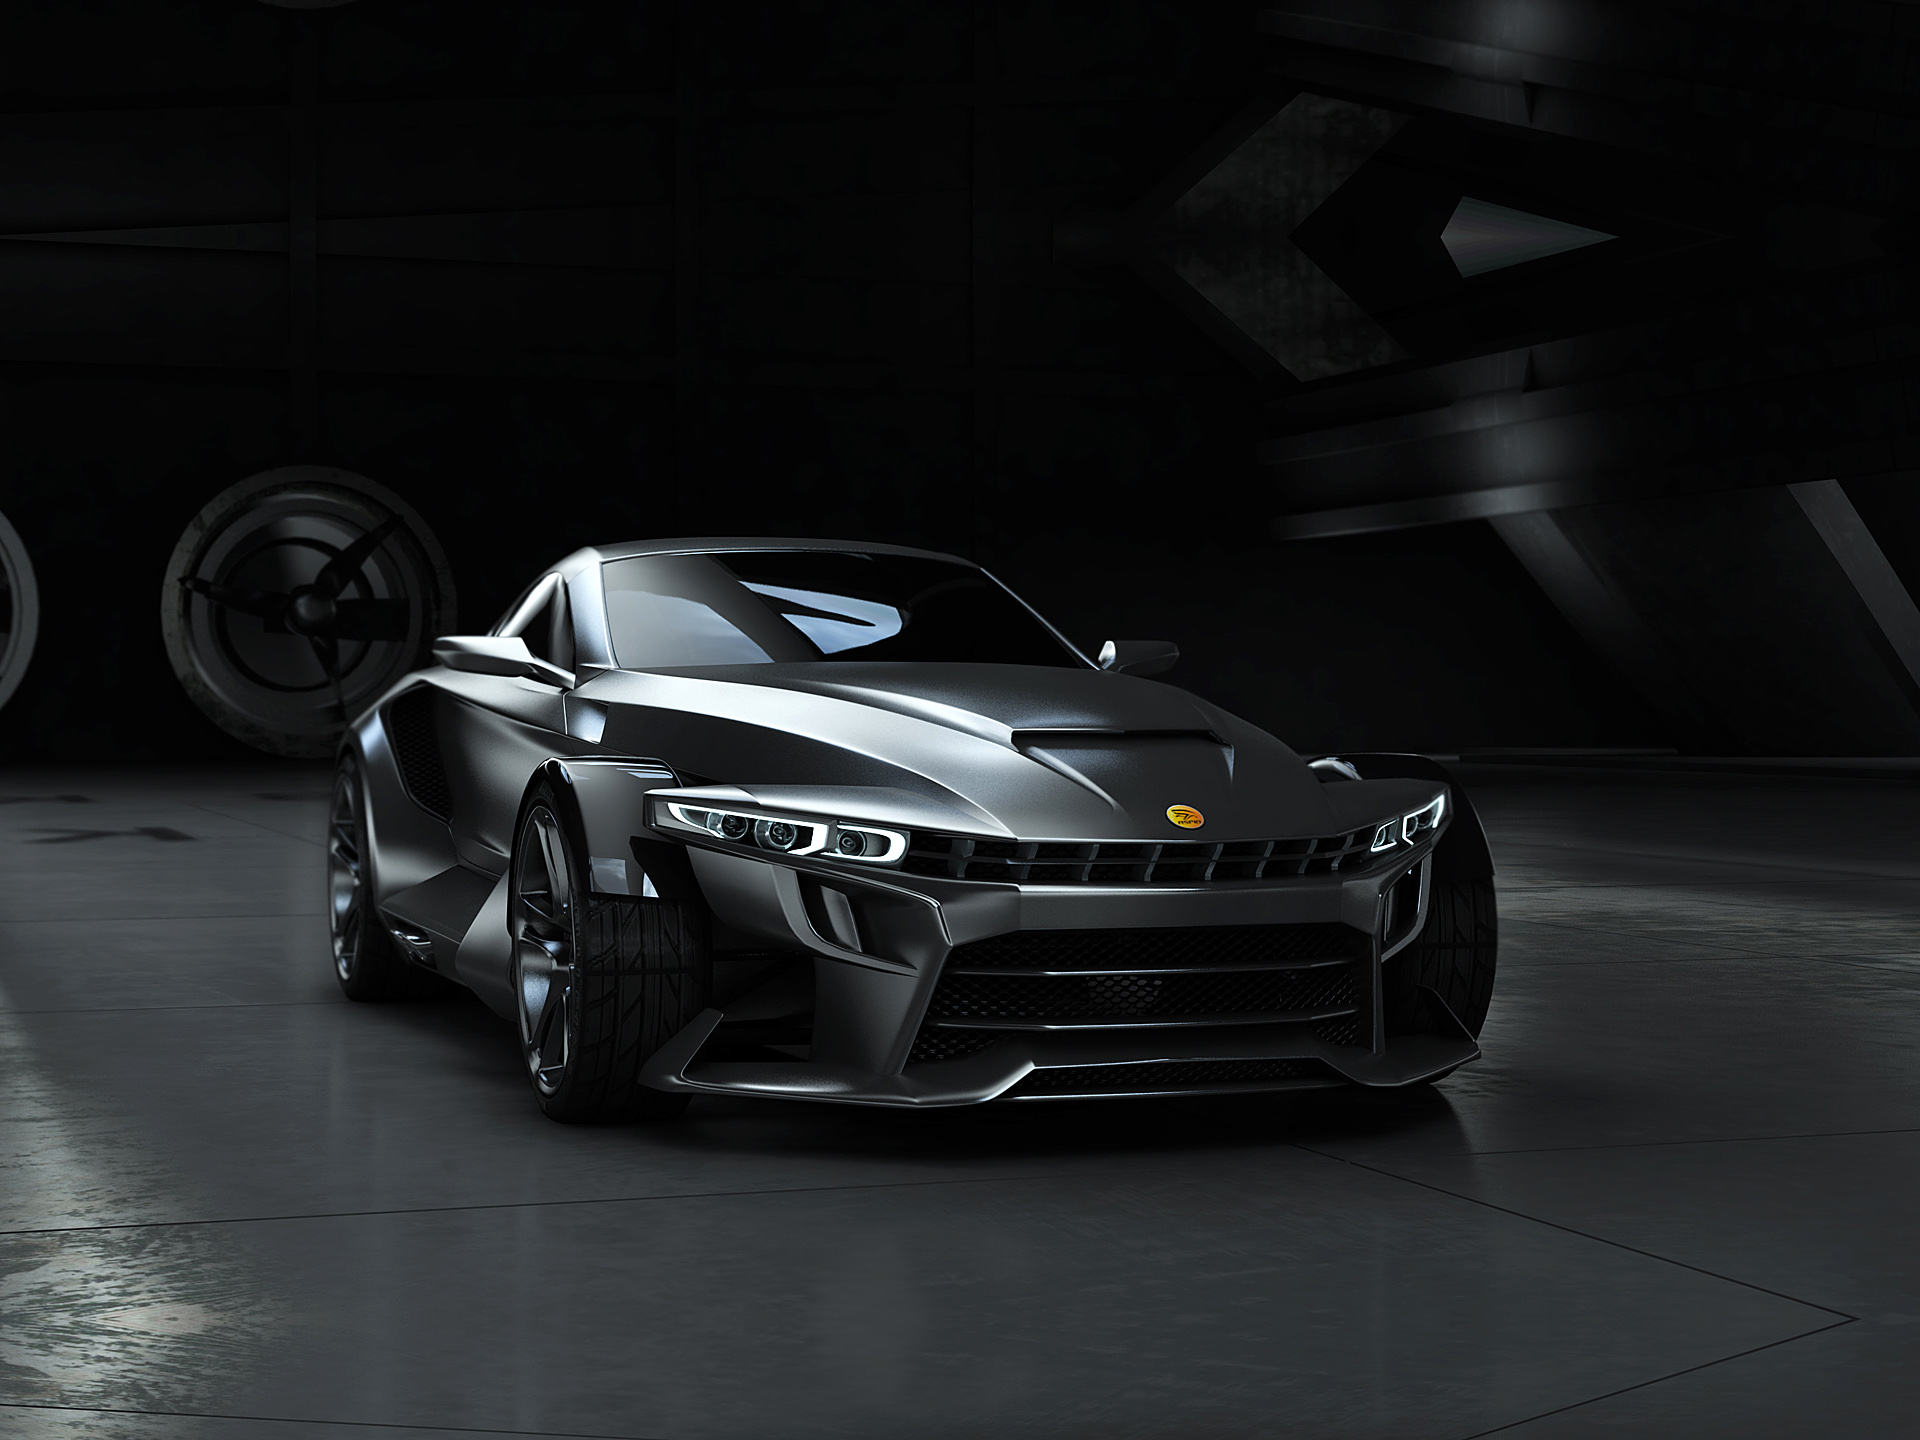 Vehicles Aspid GT-21 Invictus HD Wallpaper | Background Image